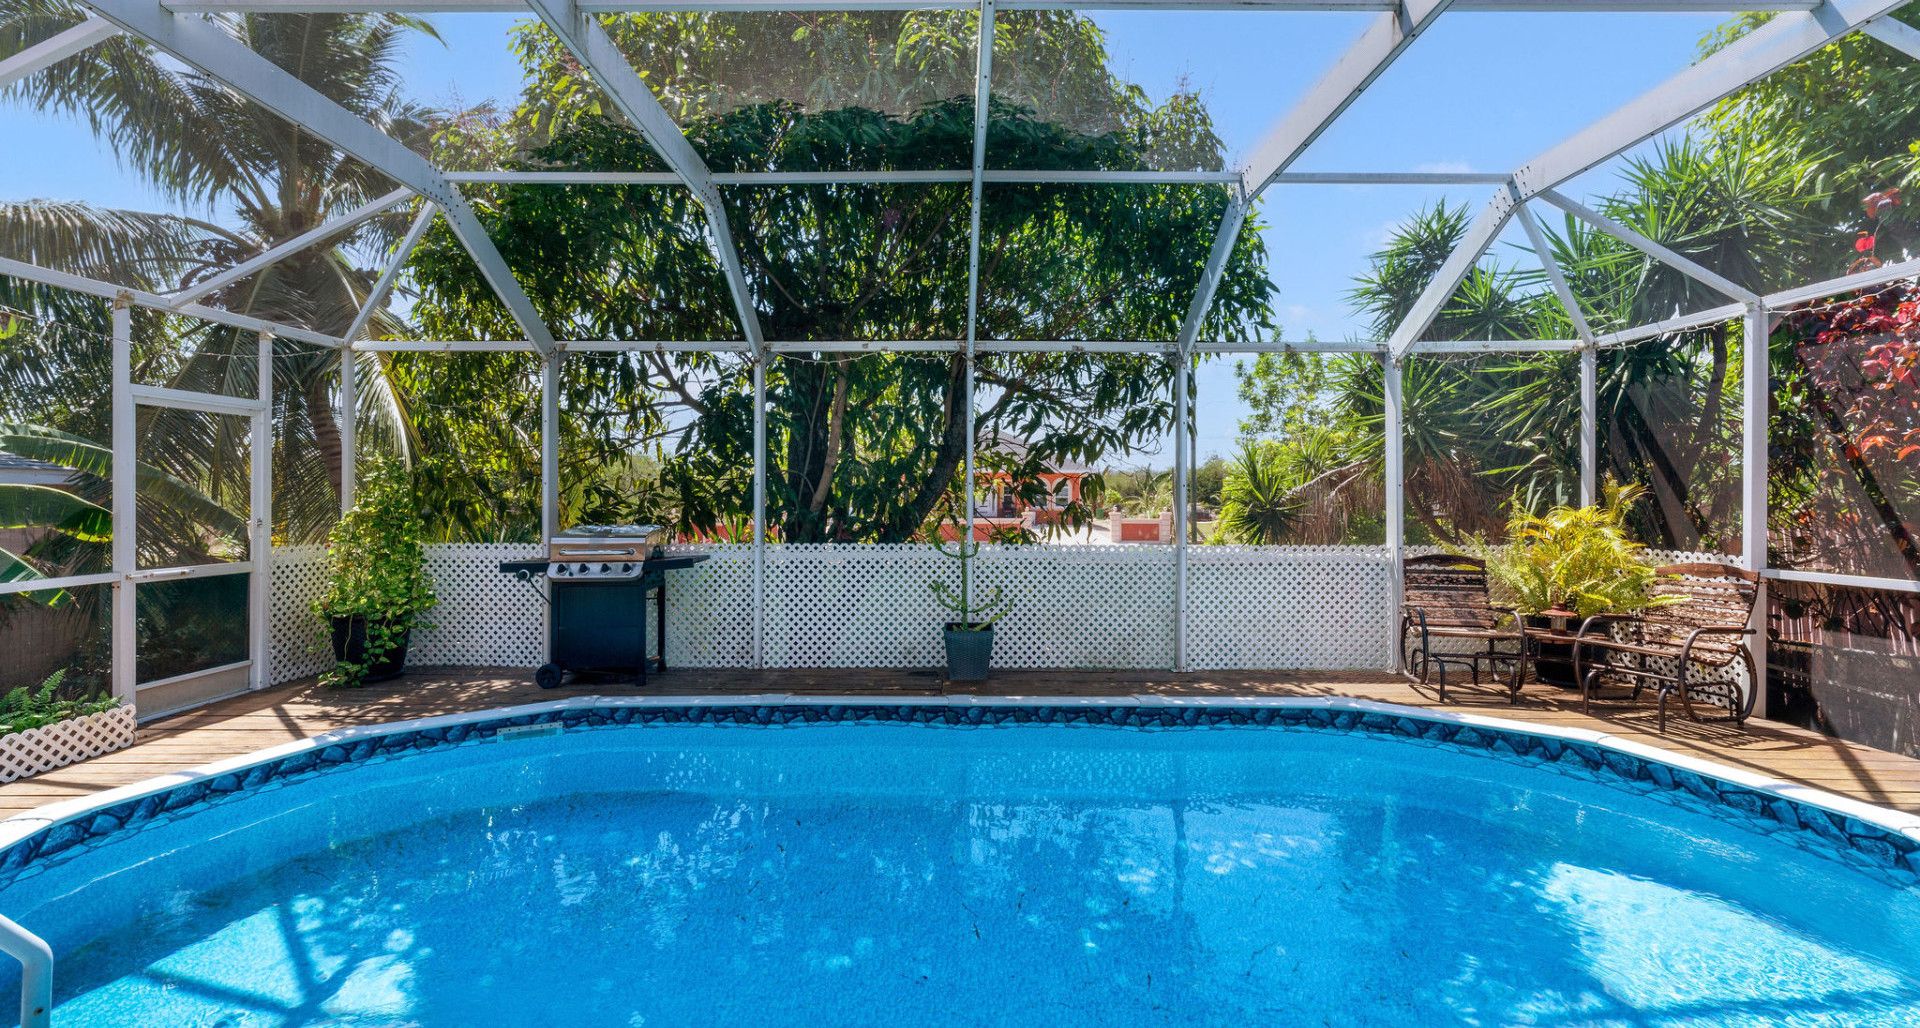 Detached Home with Pool and large garden in Northward image 1